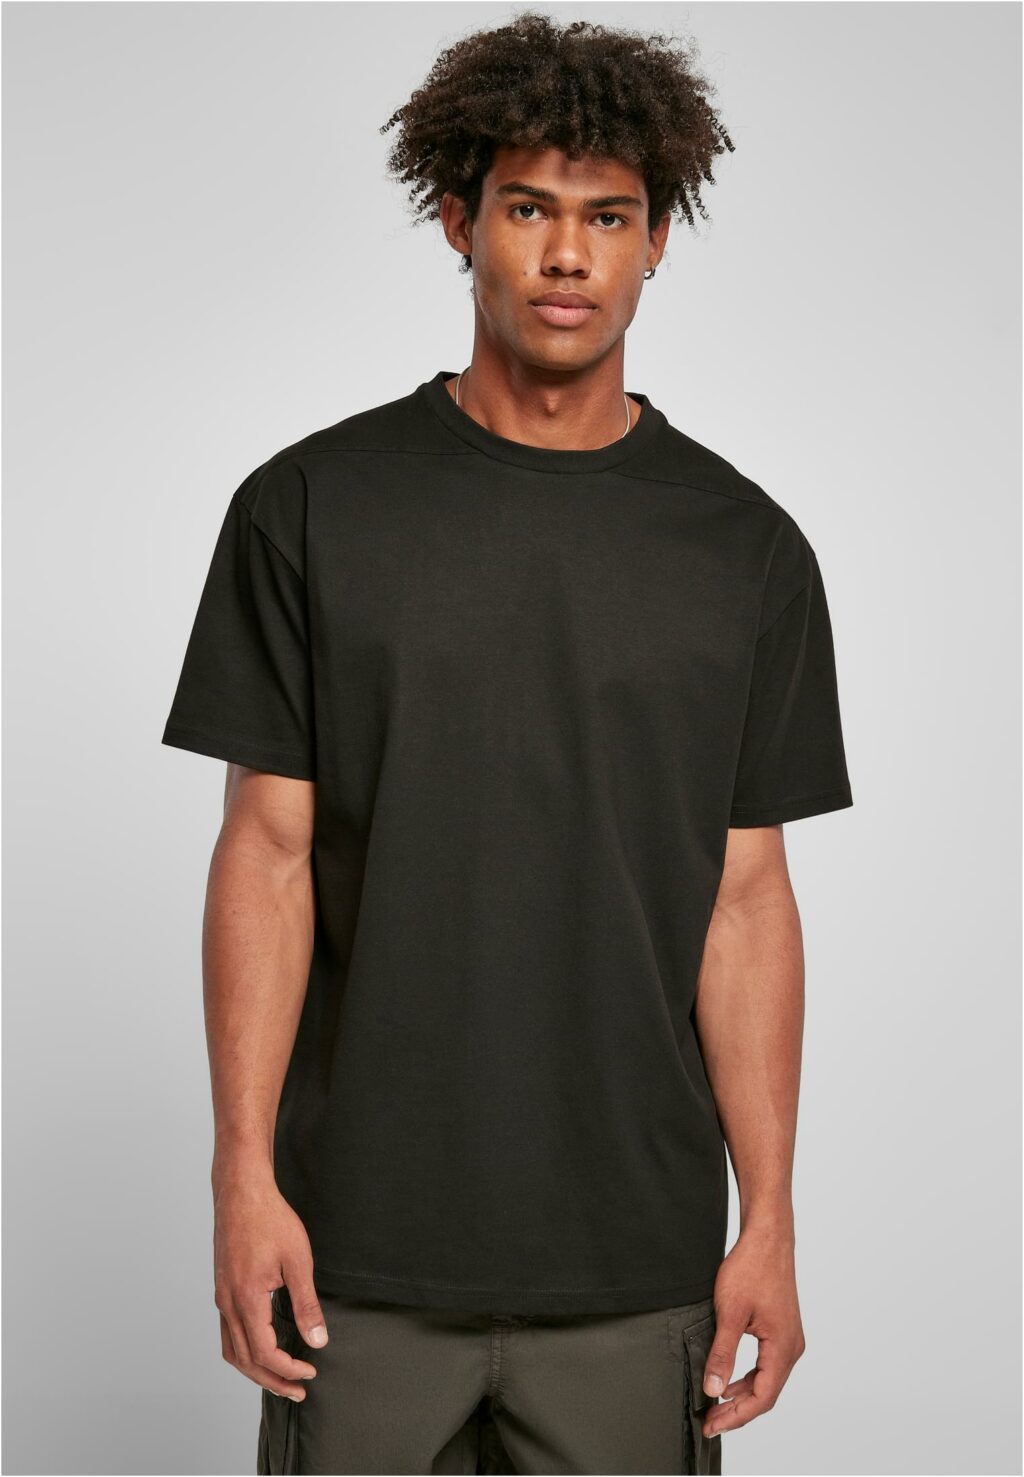 Urban Classics Recycled Curved Shoulder Tee black TB4905